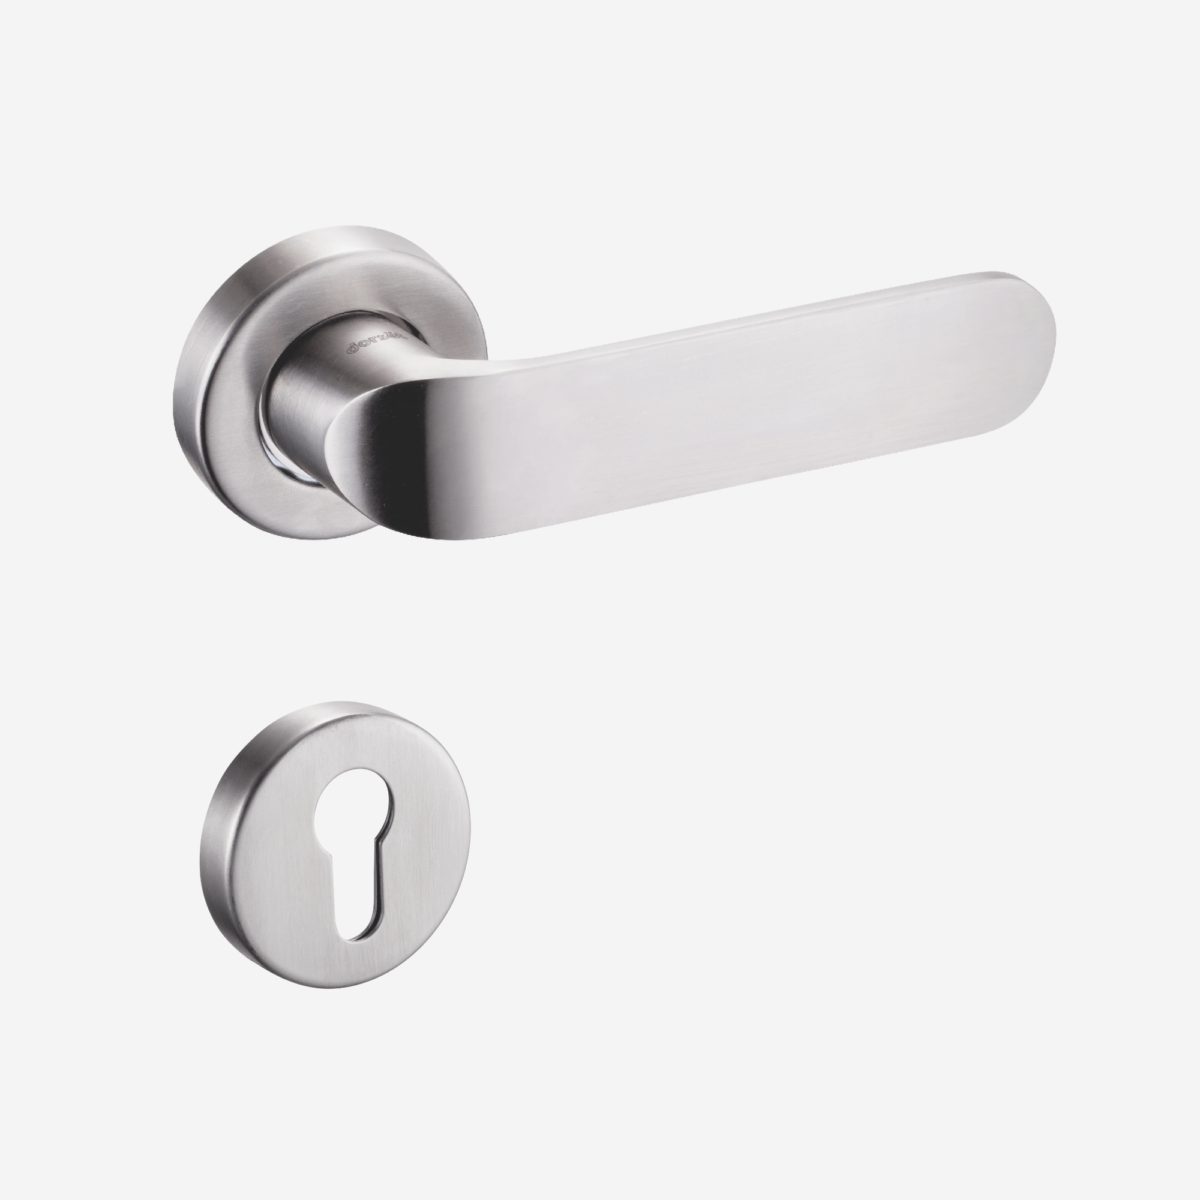 Different Types of Door Pull Handles to Add Aesthetic Value to Your Décor!